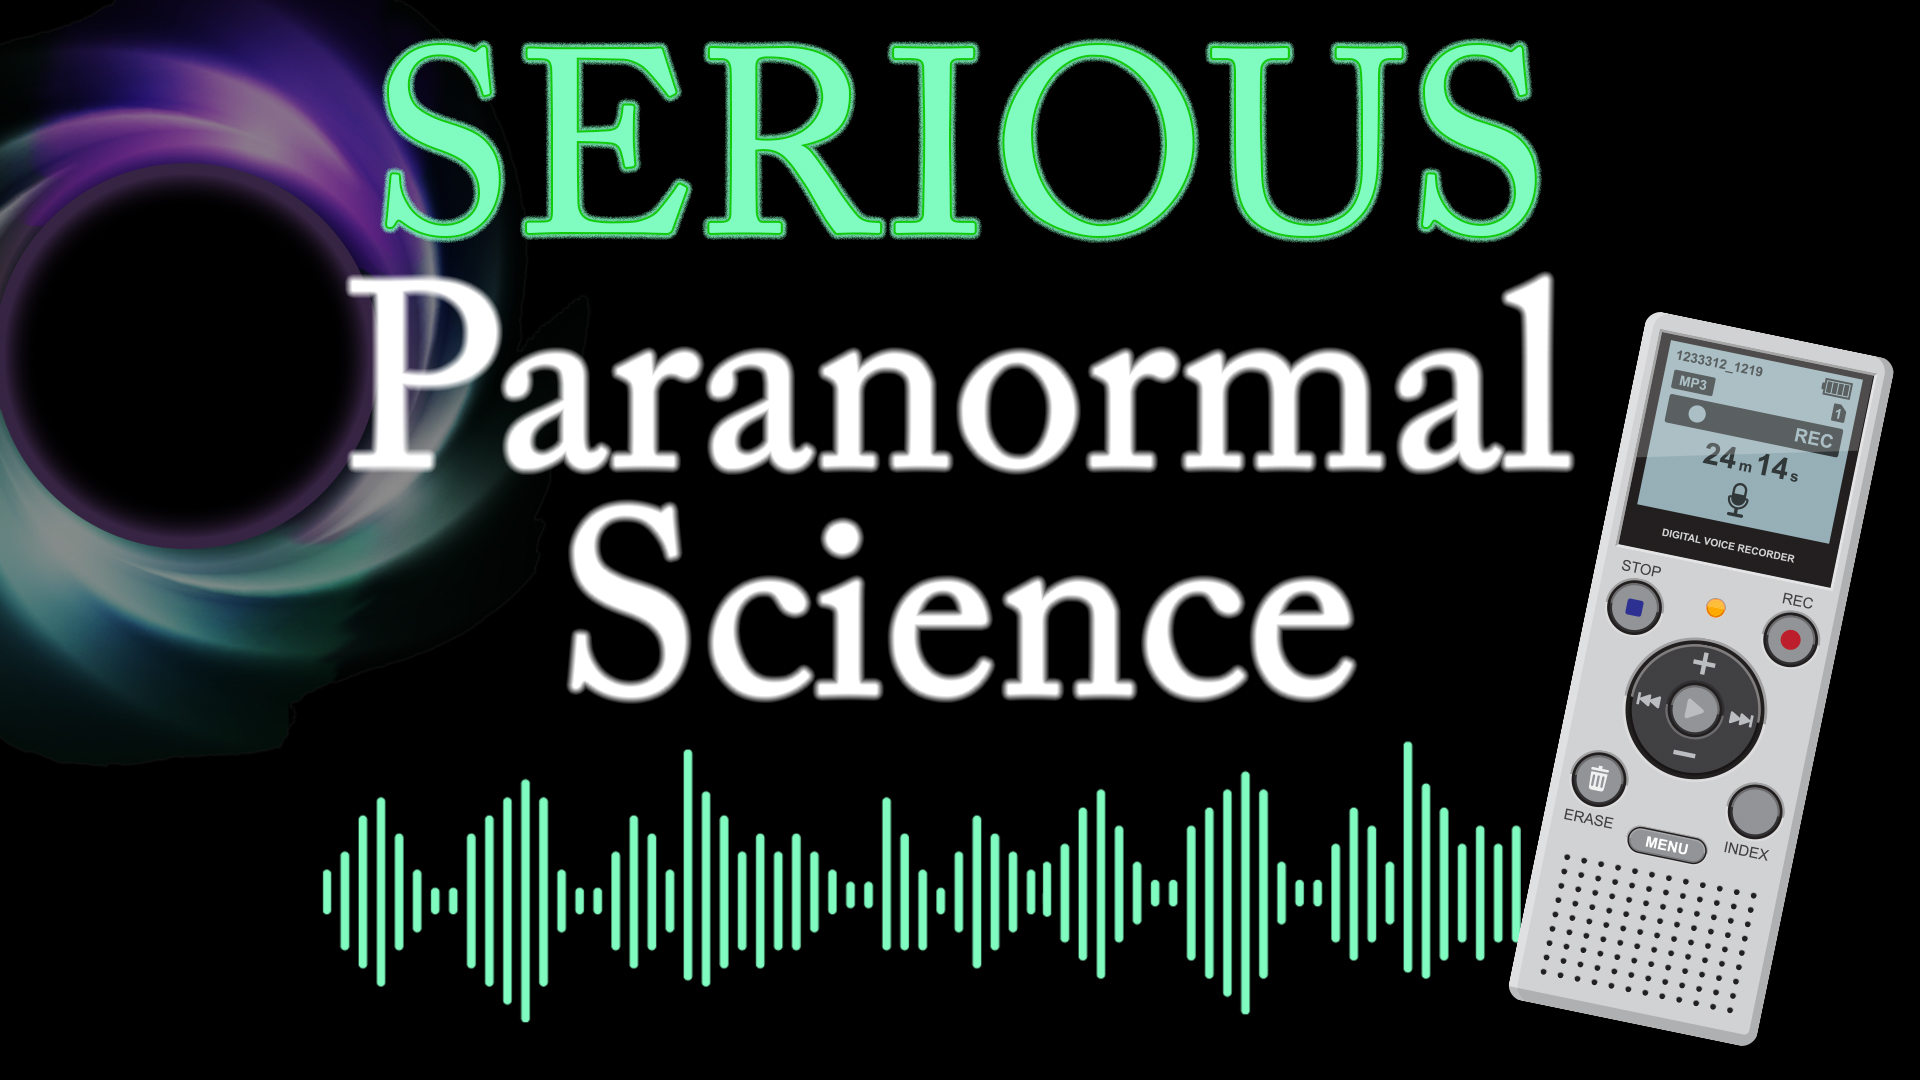 Image reads "SERIOUS Paranormal Science" against a black background. An audio recorder and sound wave are under the title. A glowing aura is to the left of the title.